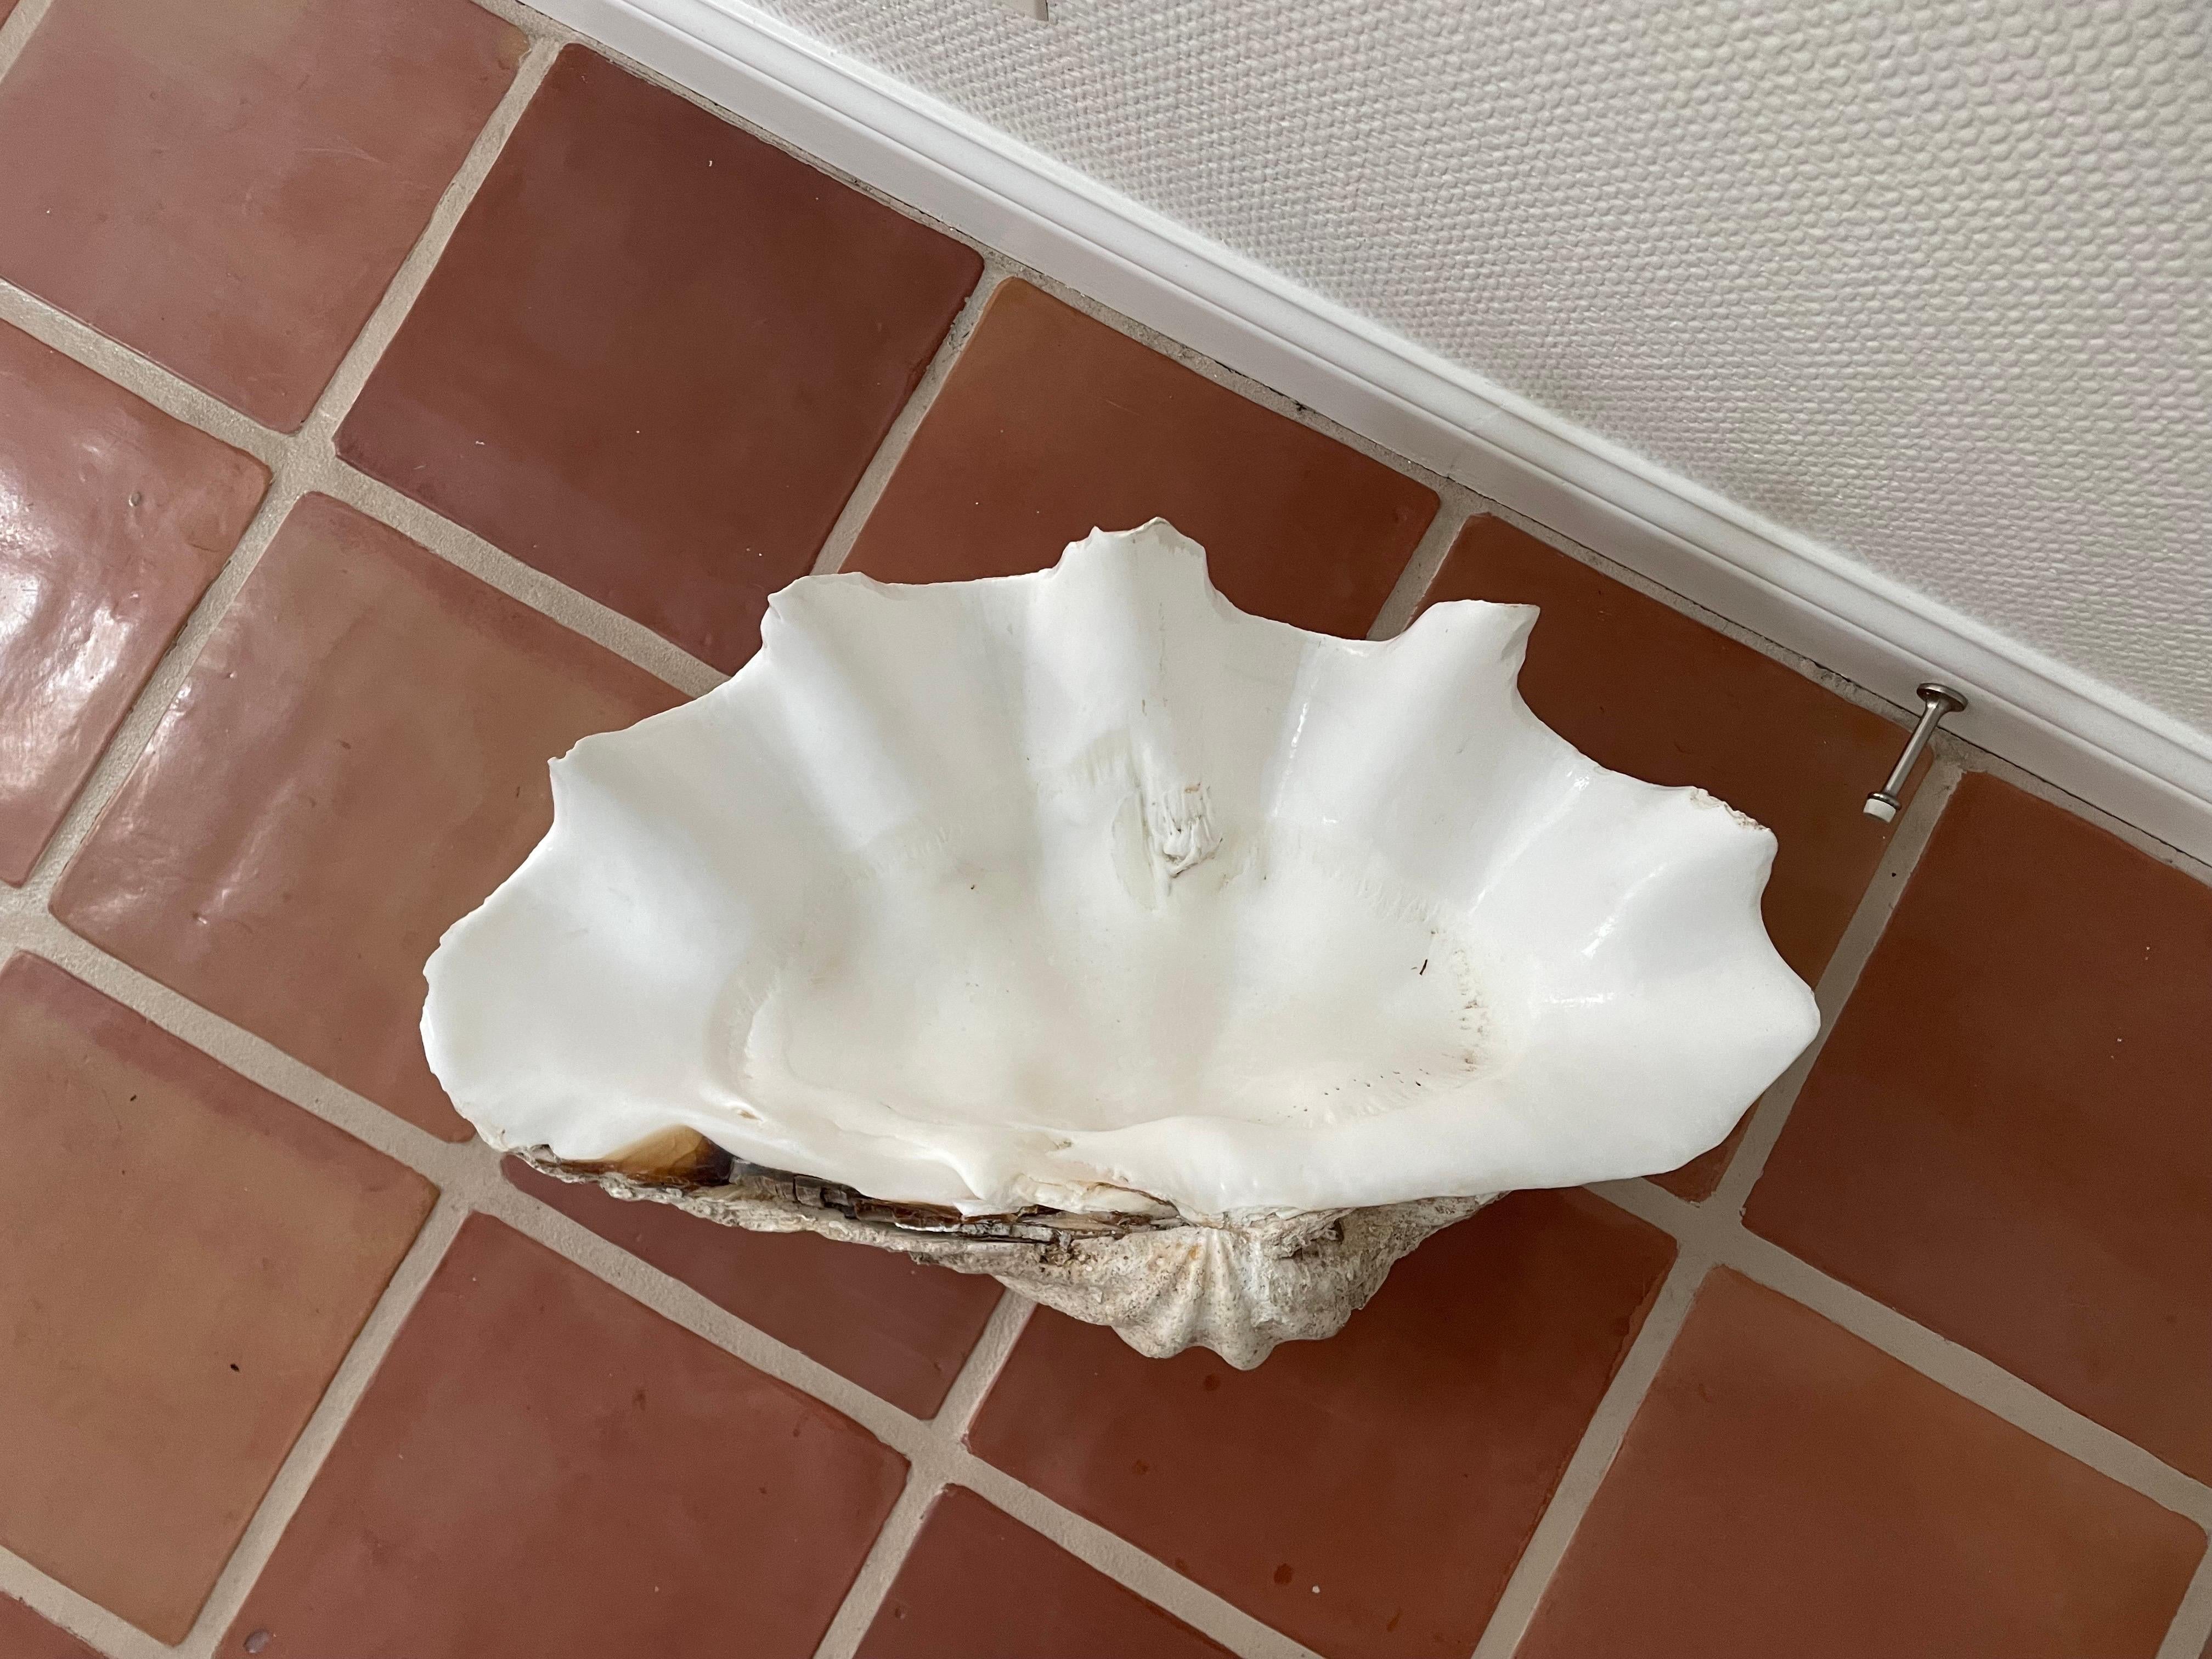 This is a wonderful Gigas Tridacna (clam) shell.
It has a wonderful intact shape with a very white interior 
This shell came from an estate that had in its collection for many years.